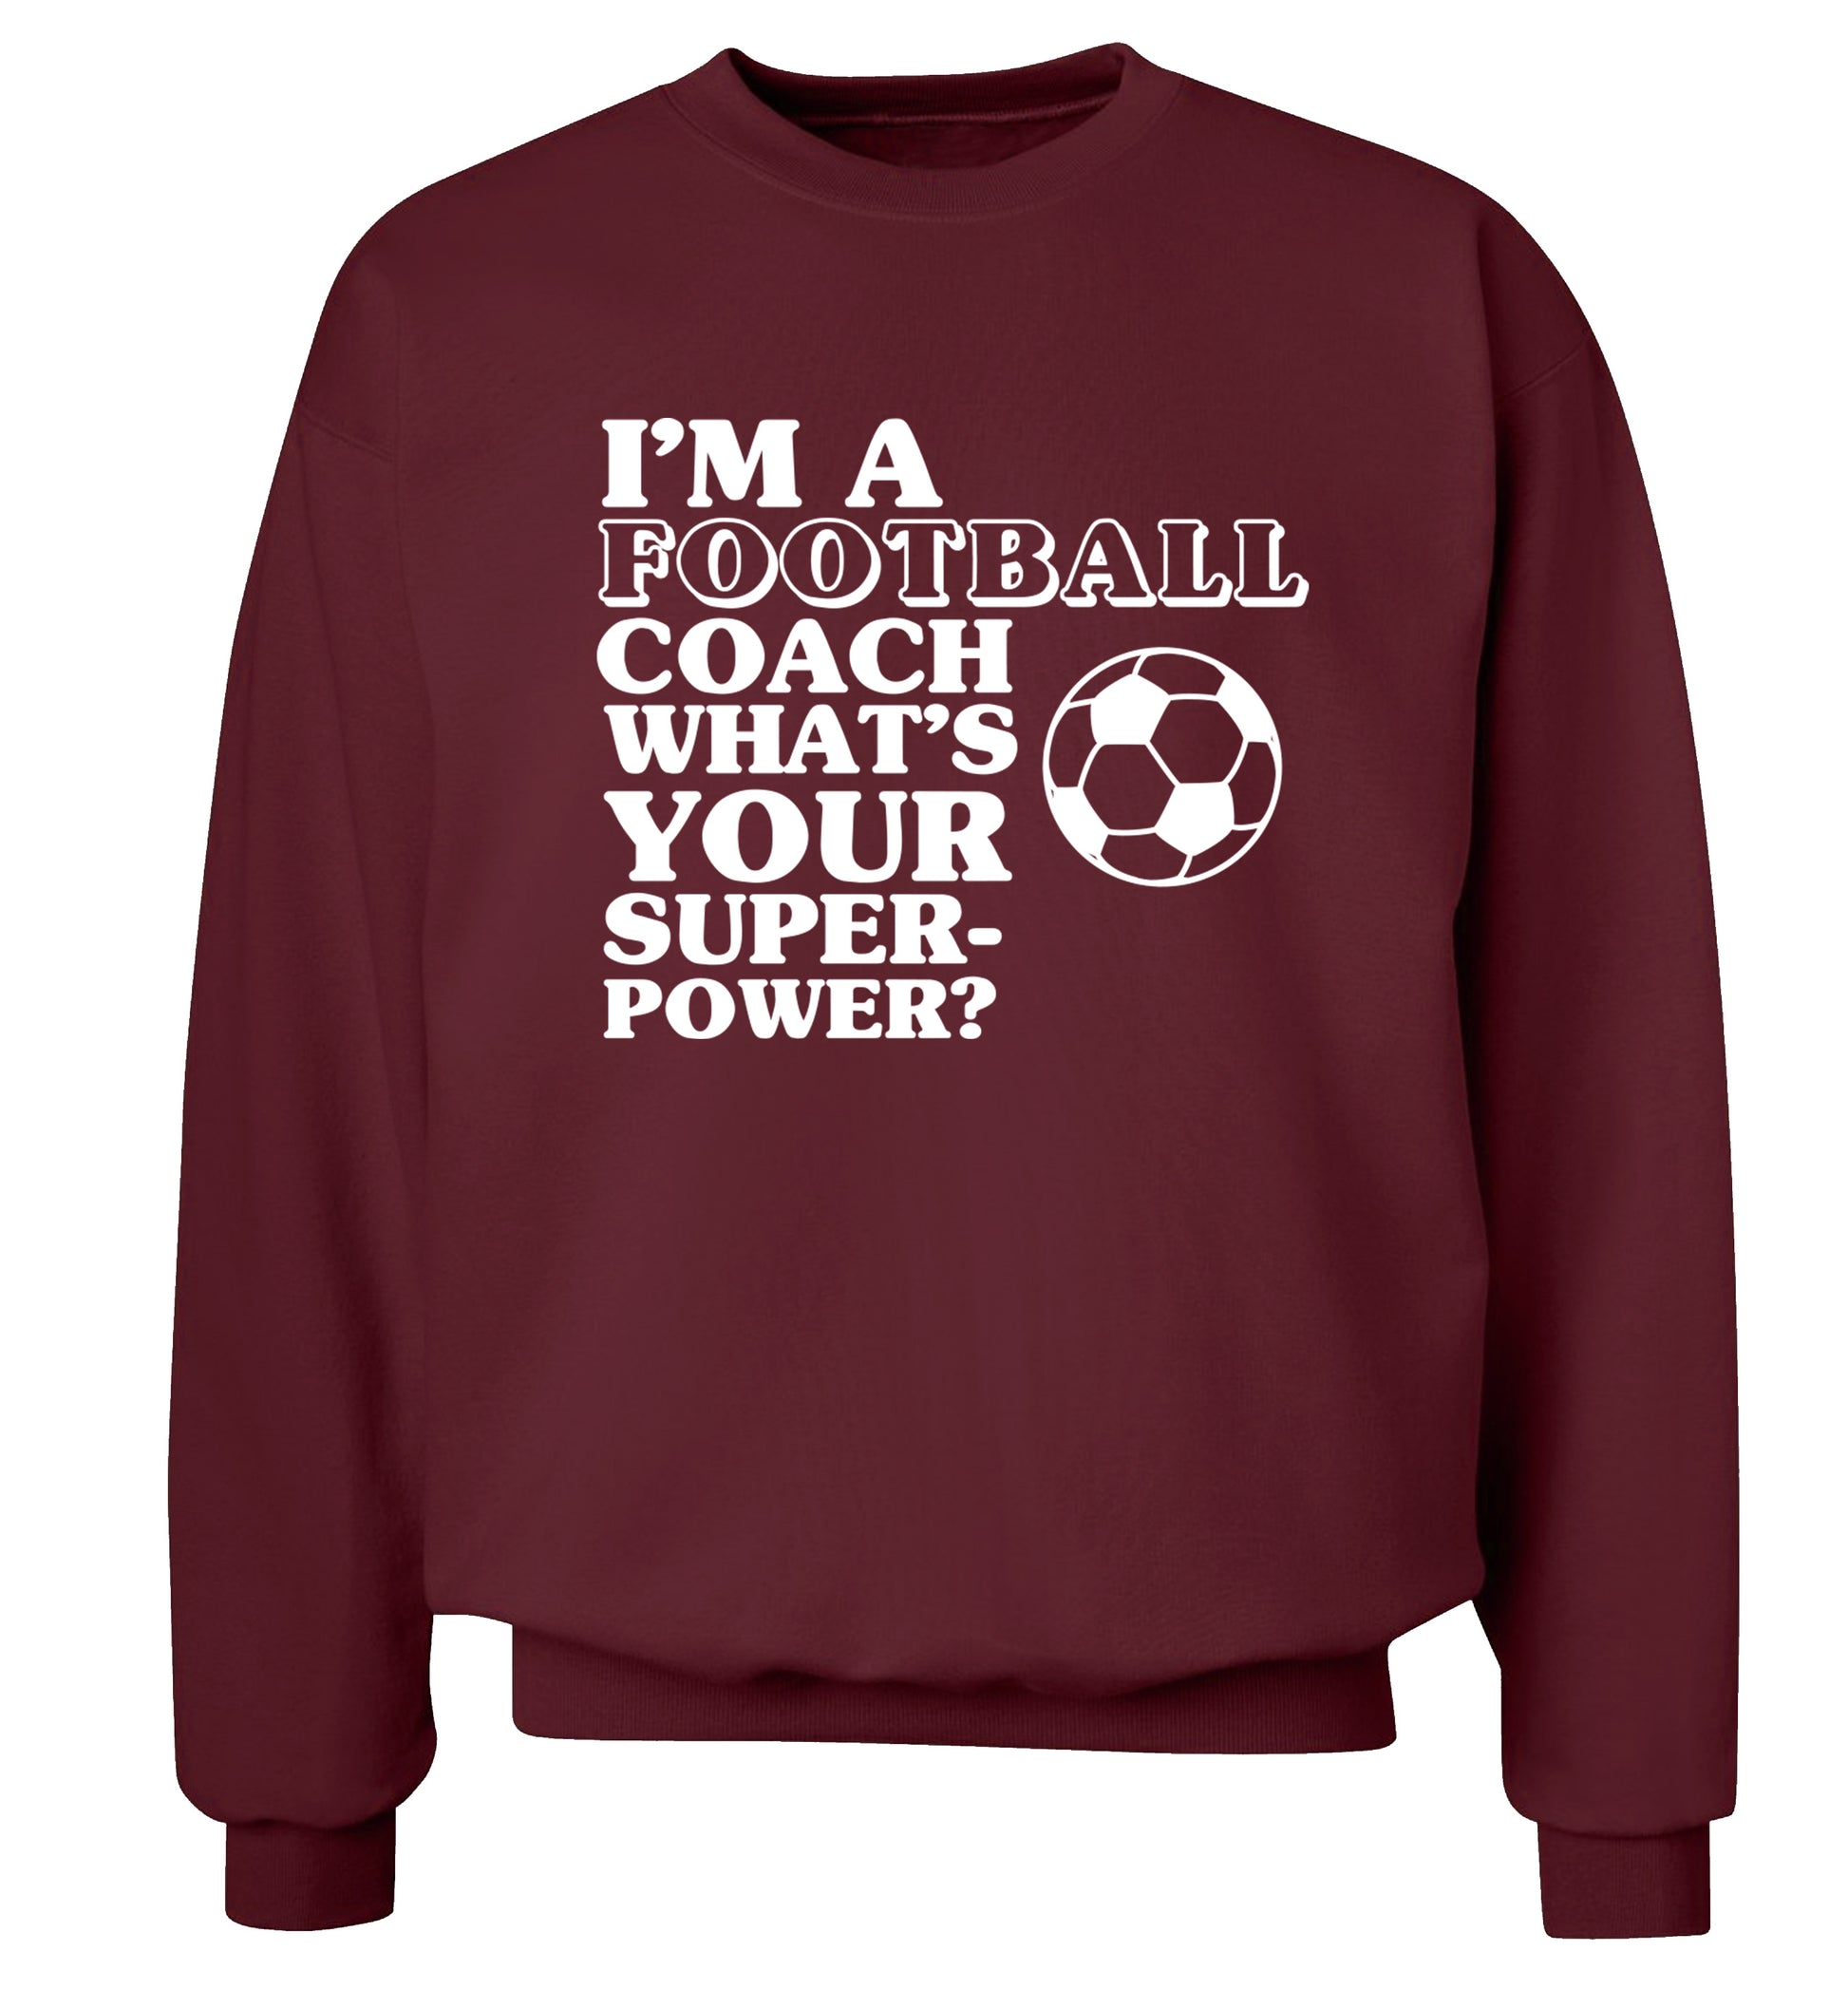 I'm a football coach what's your superpower? Adult's unisexmaroon Sweater 2XL